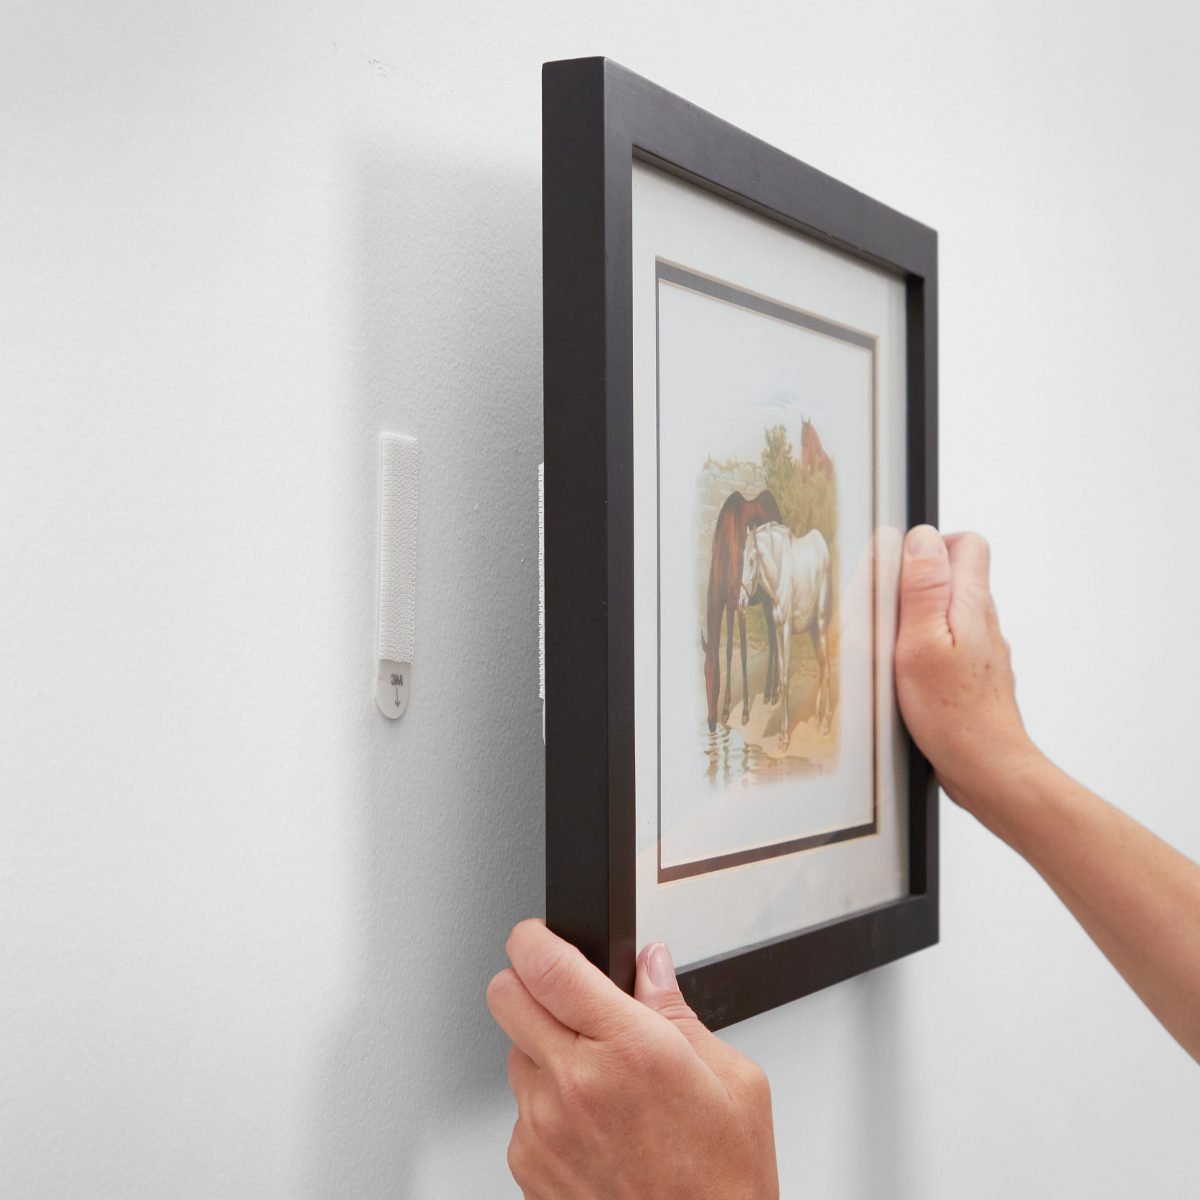 Hang Art Without Nails - How to Hang Art